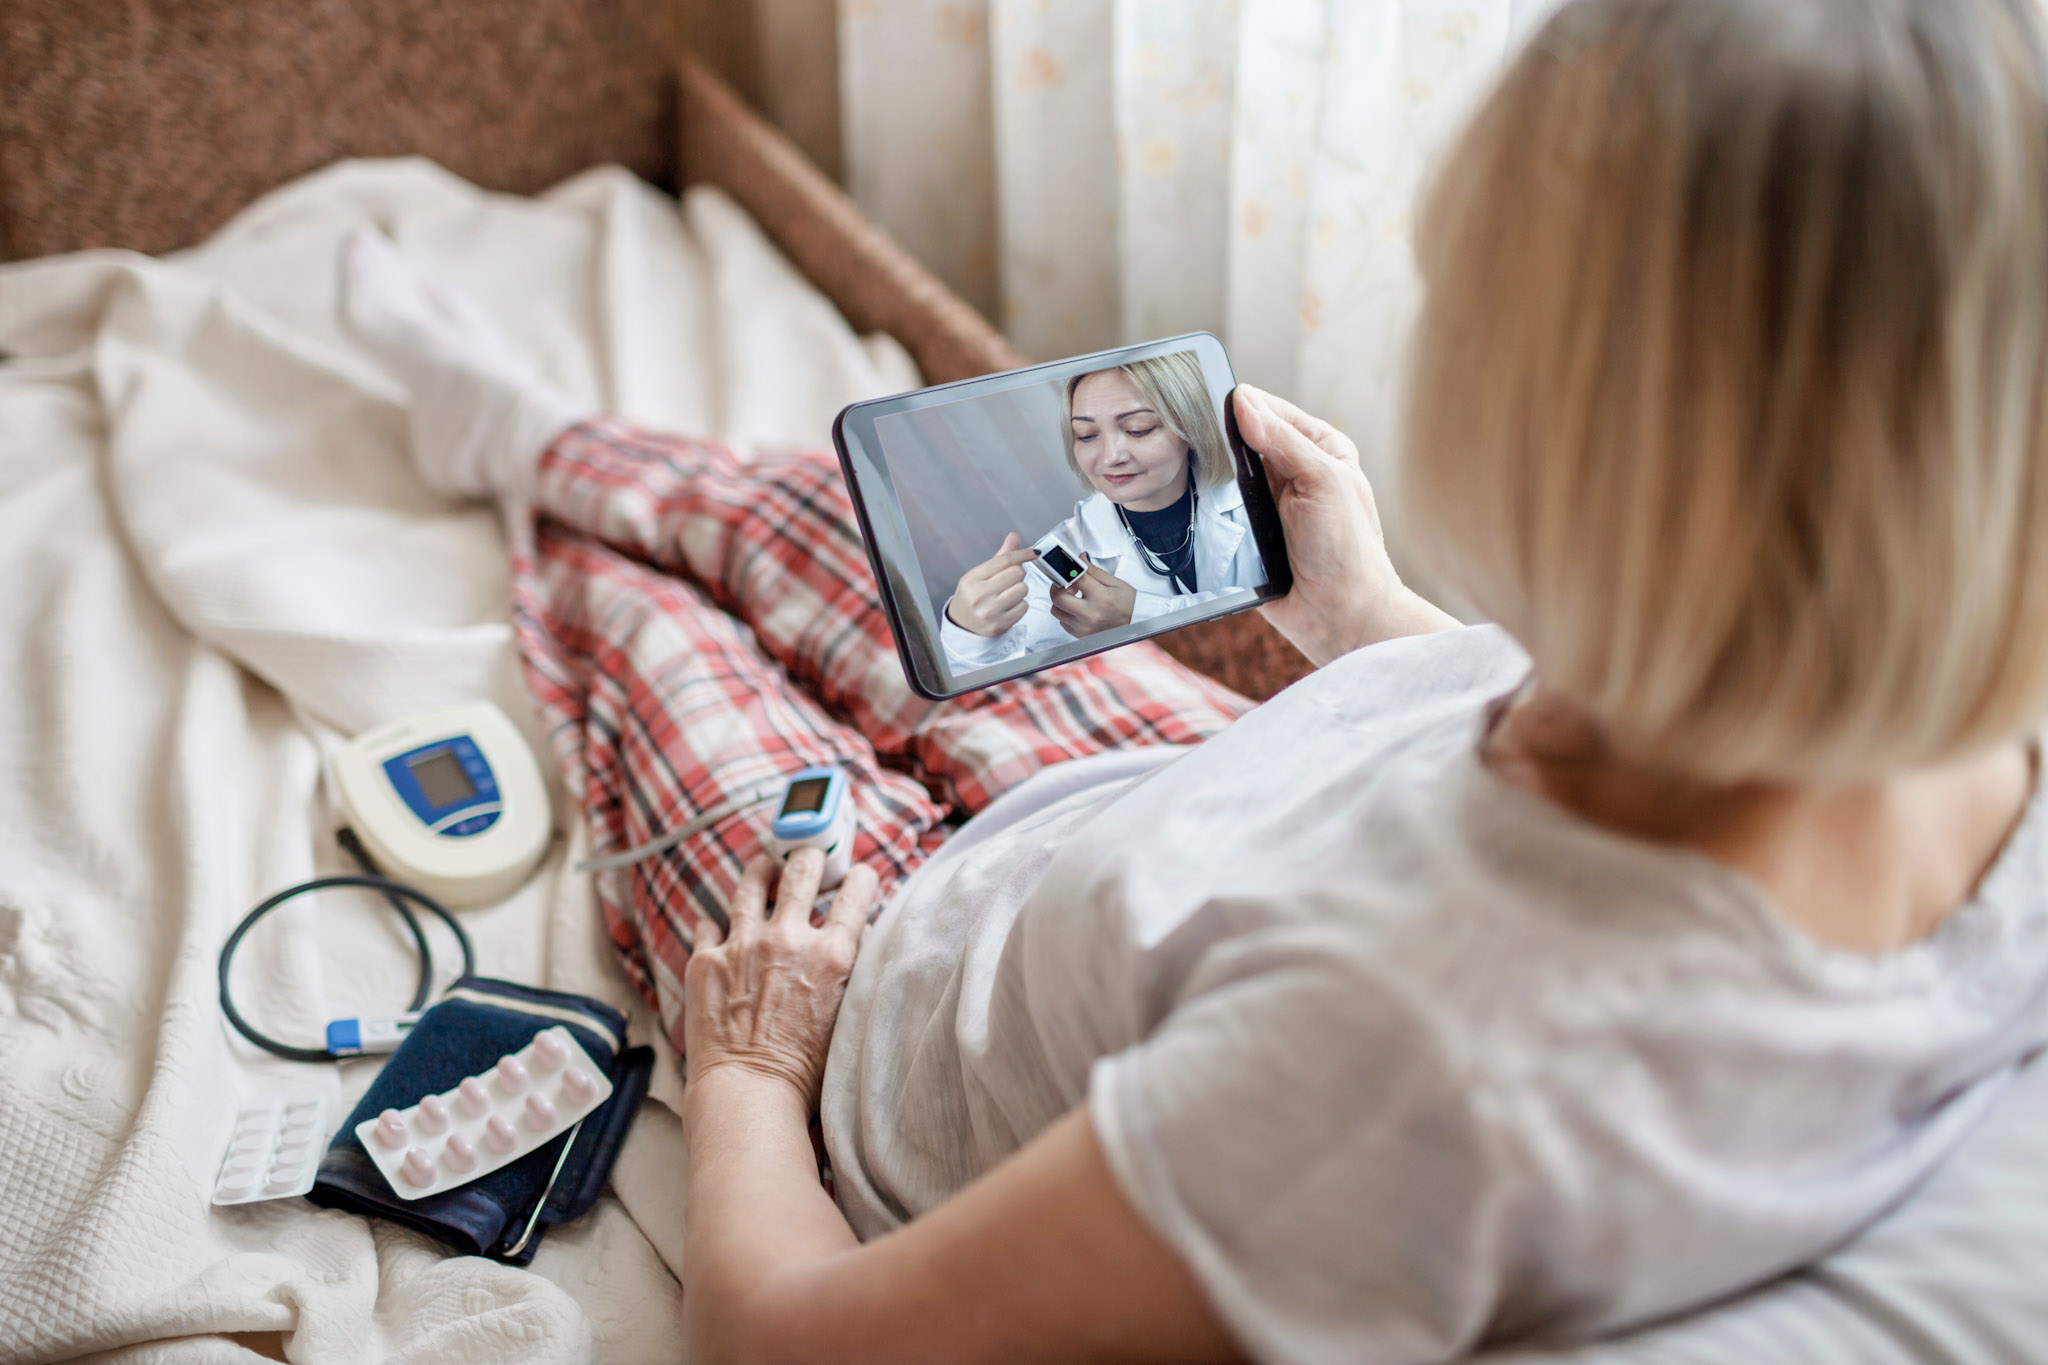 stock photo of an old woman in bed getting a telemedicine appointment on her tablet